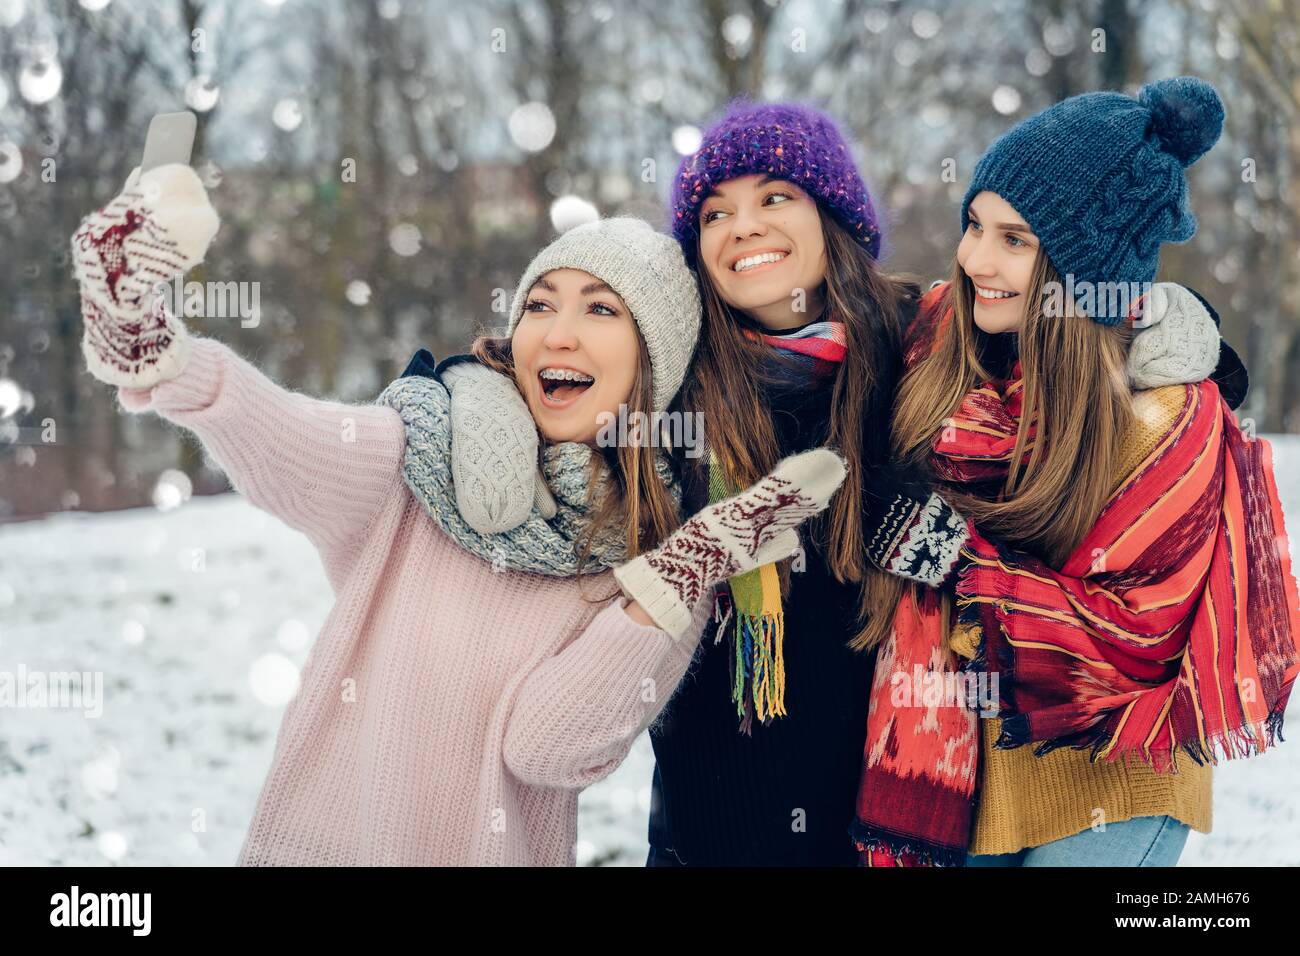 Three women friends outdoors in knitted hats using mobile phone on a snowy cold weather. Group of young female friends enjoying taking selfies Stock Photo